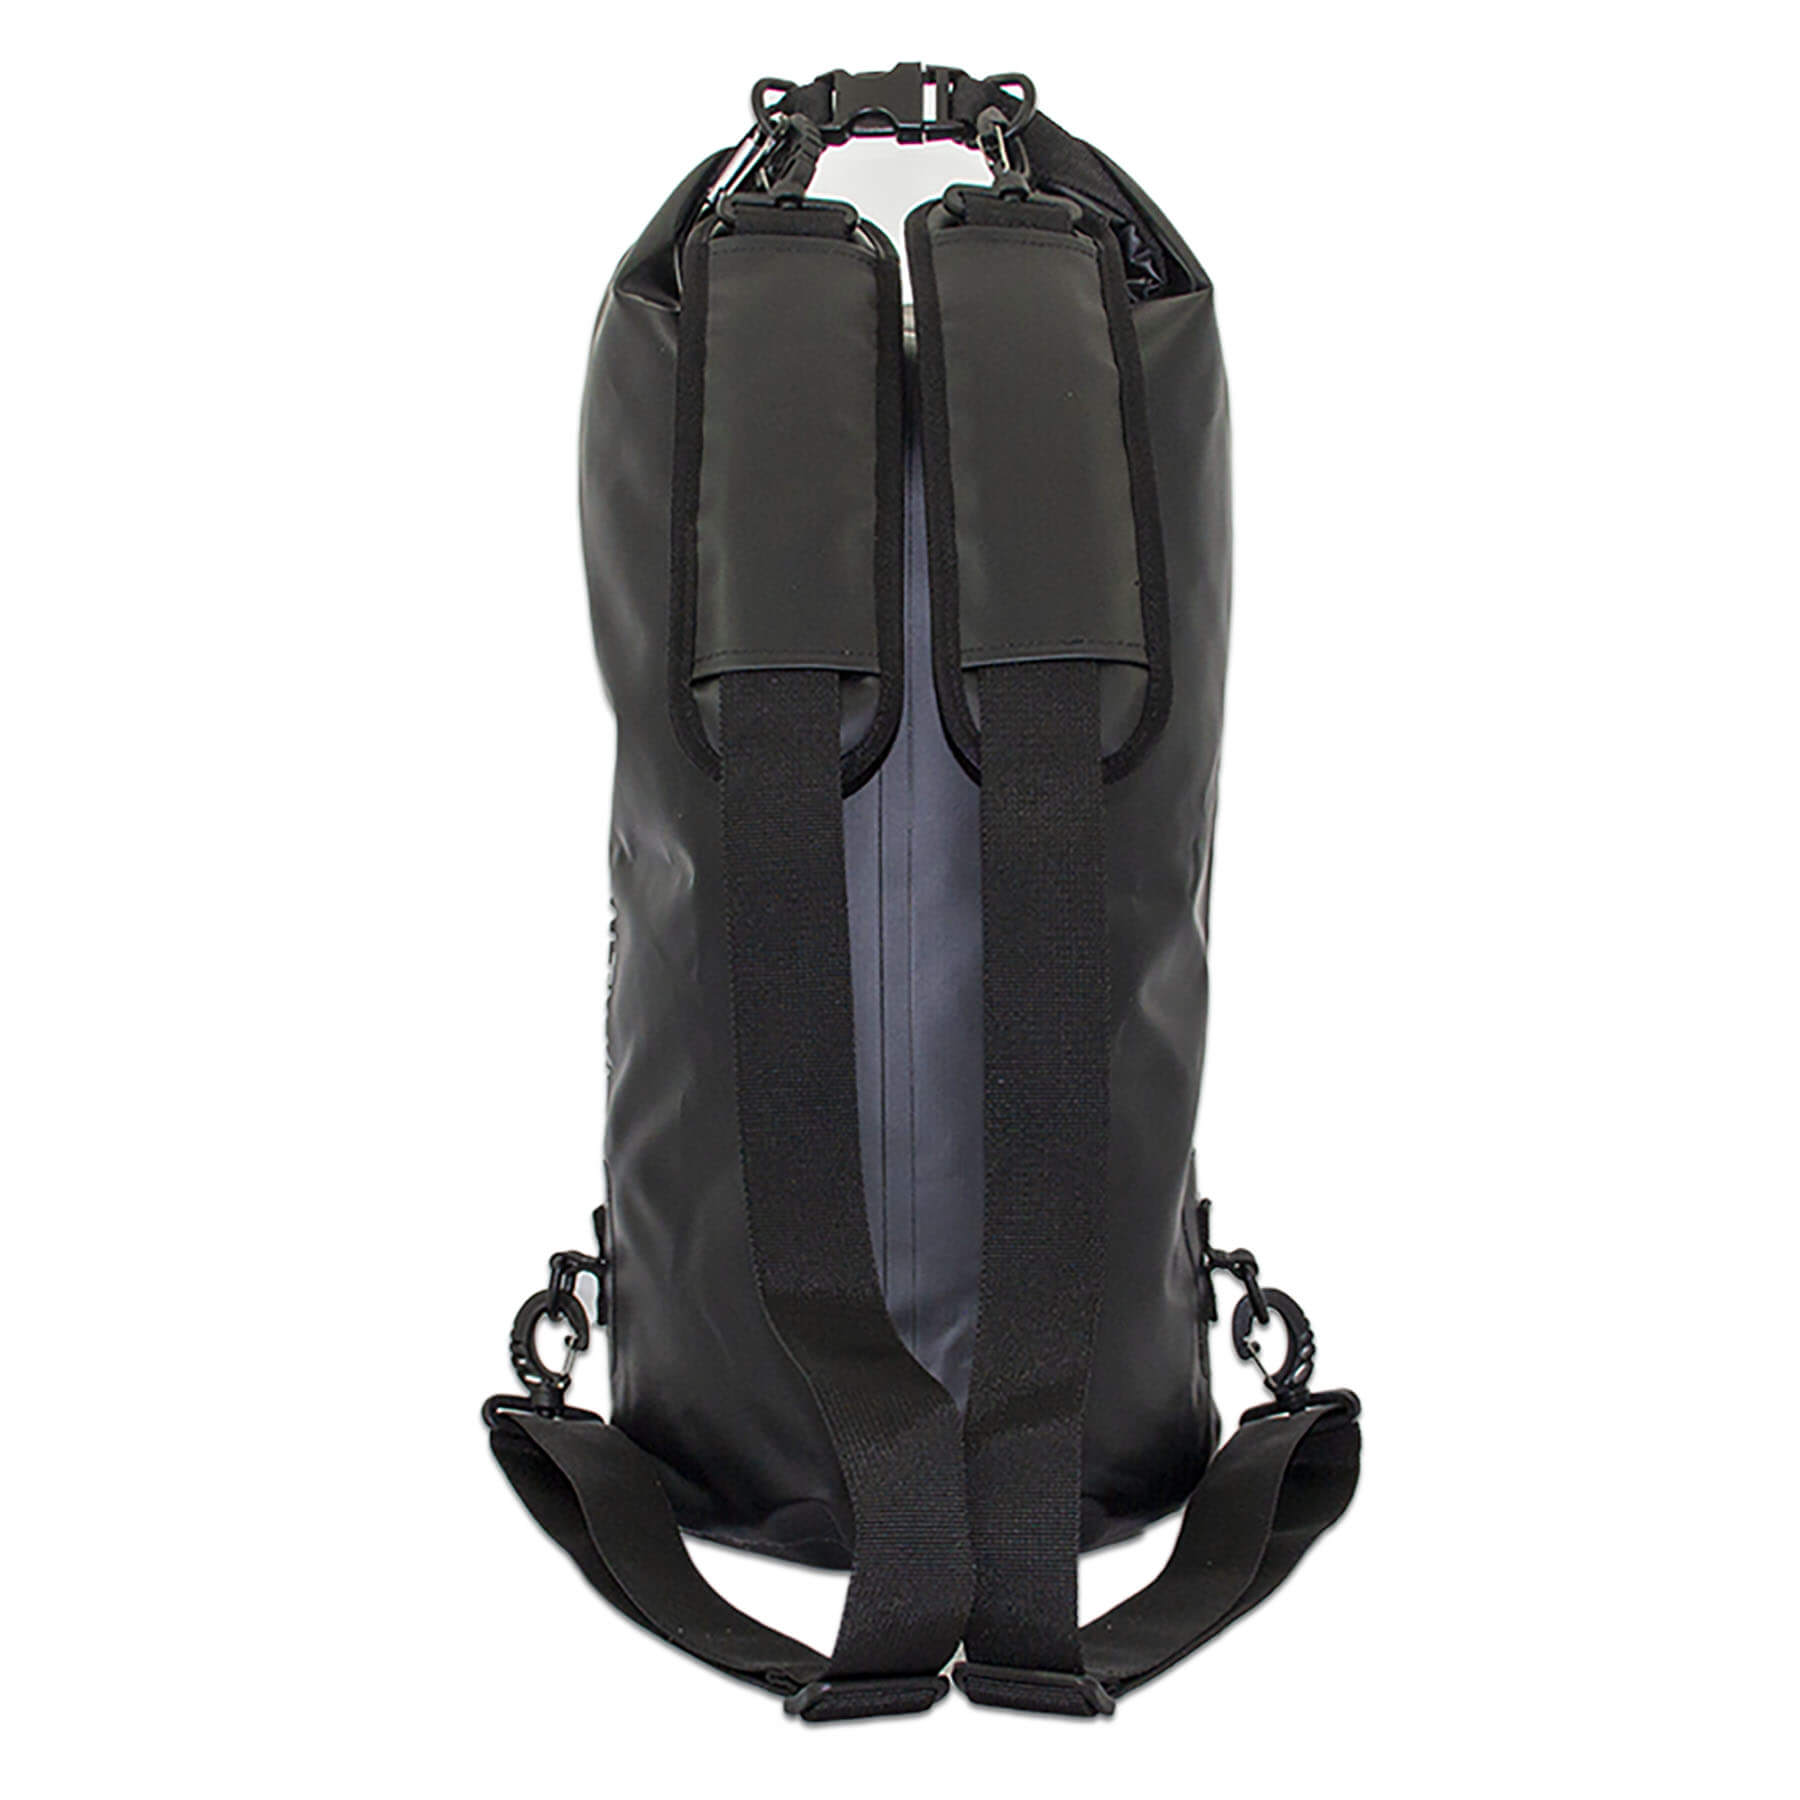 waterproof dry bag 20 litres with detachable comfort straps, D rings and handle in black back view